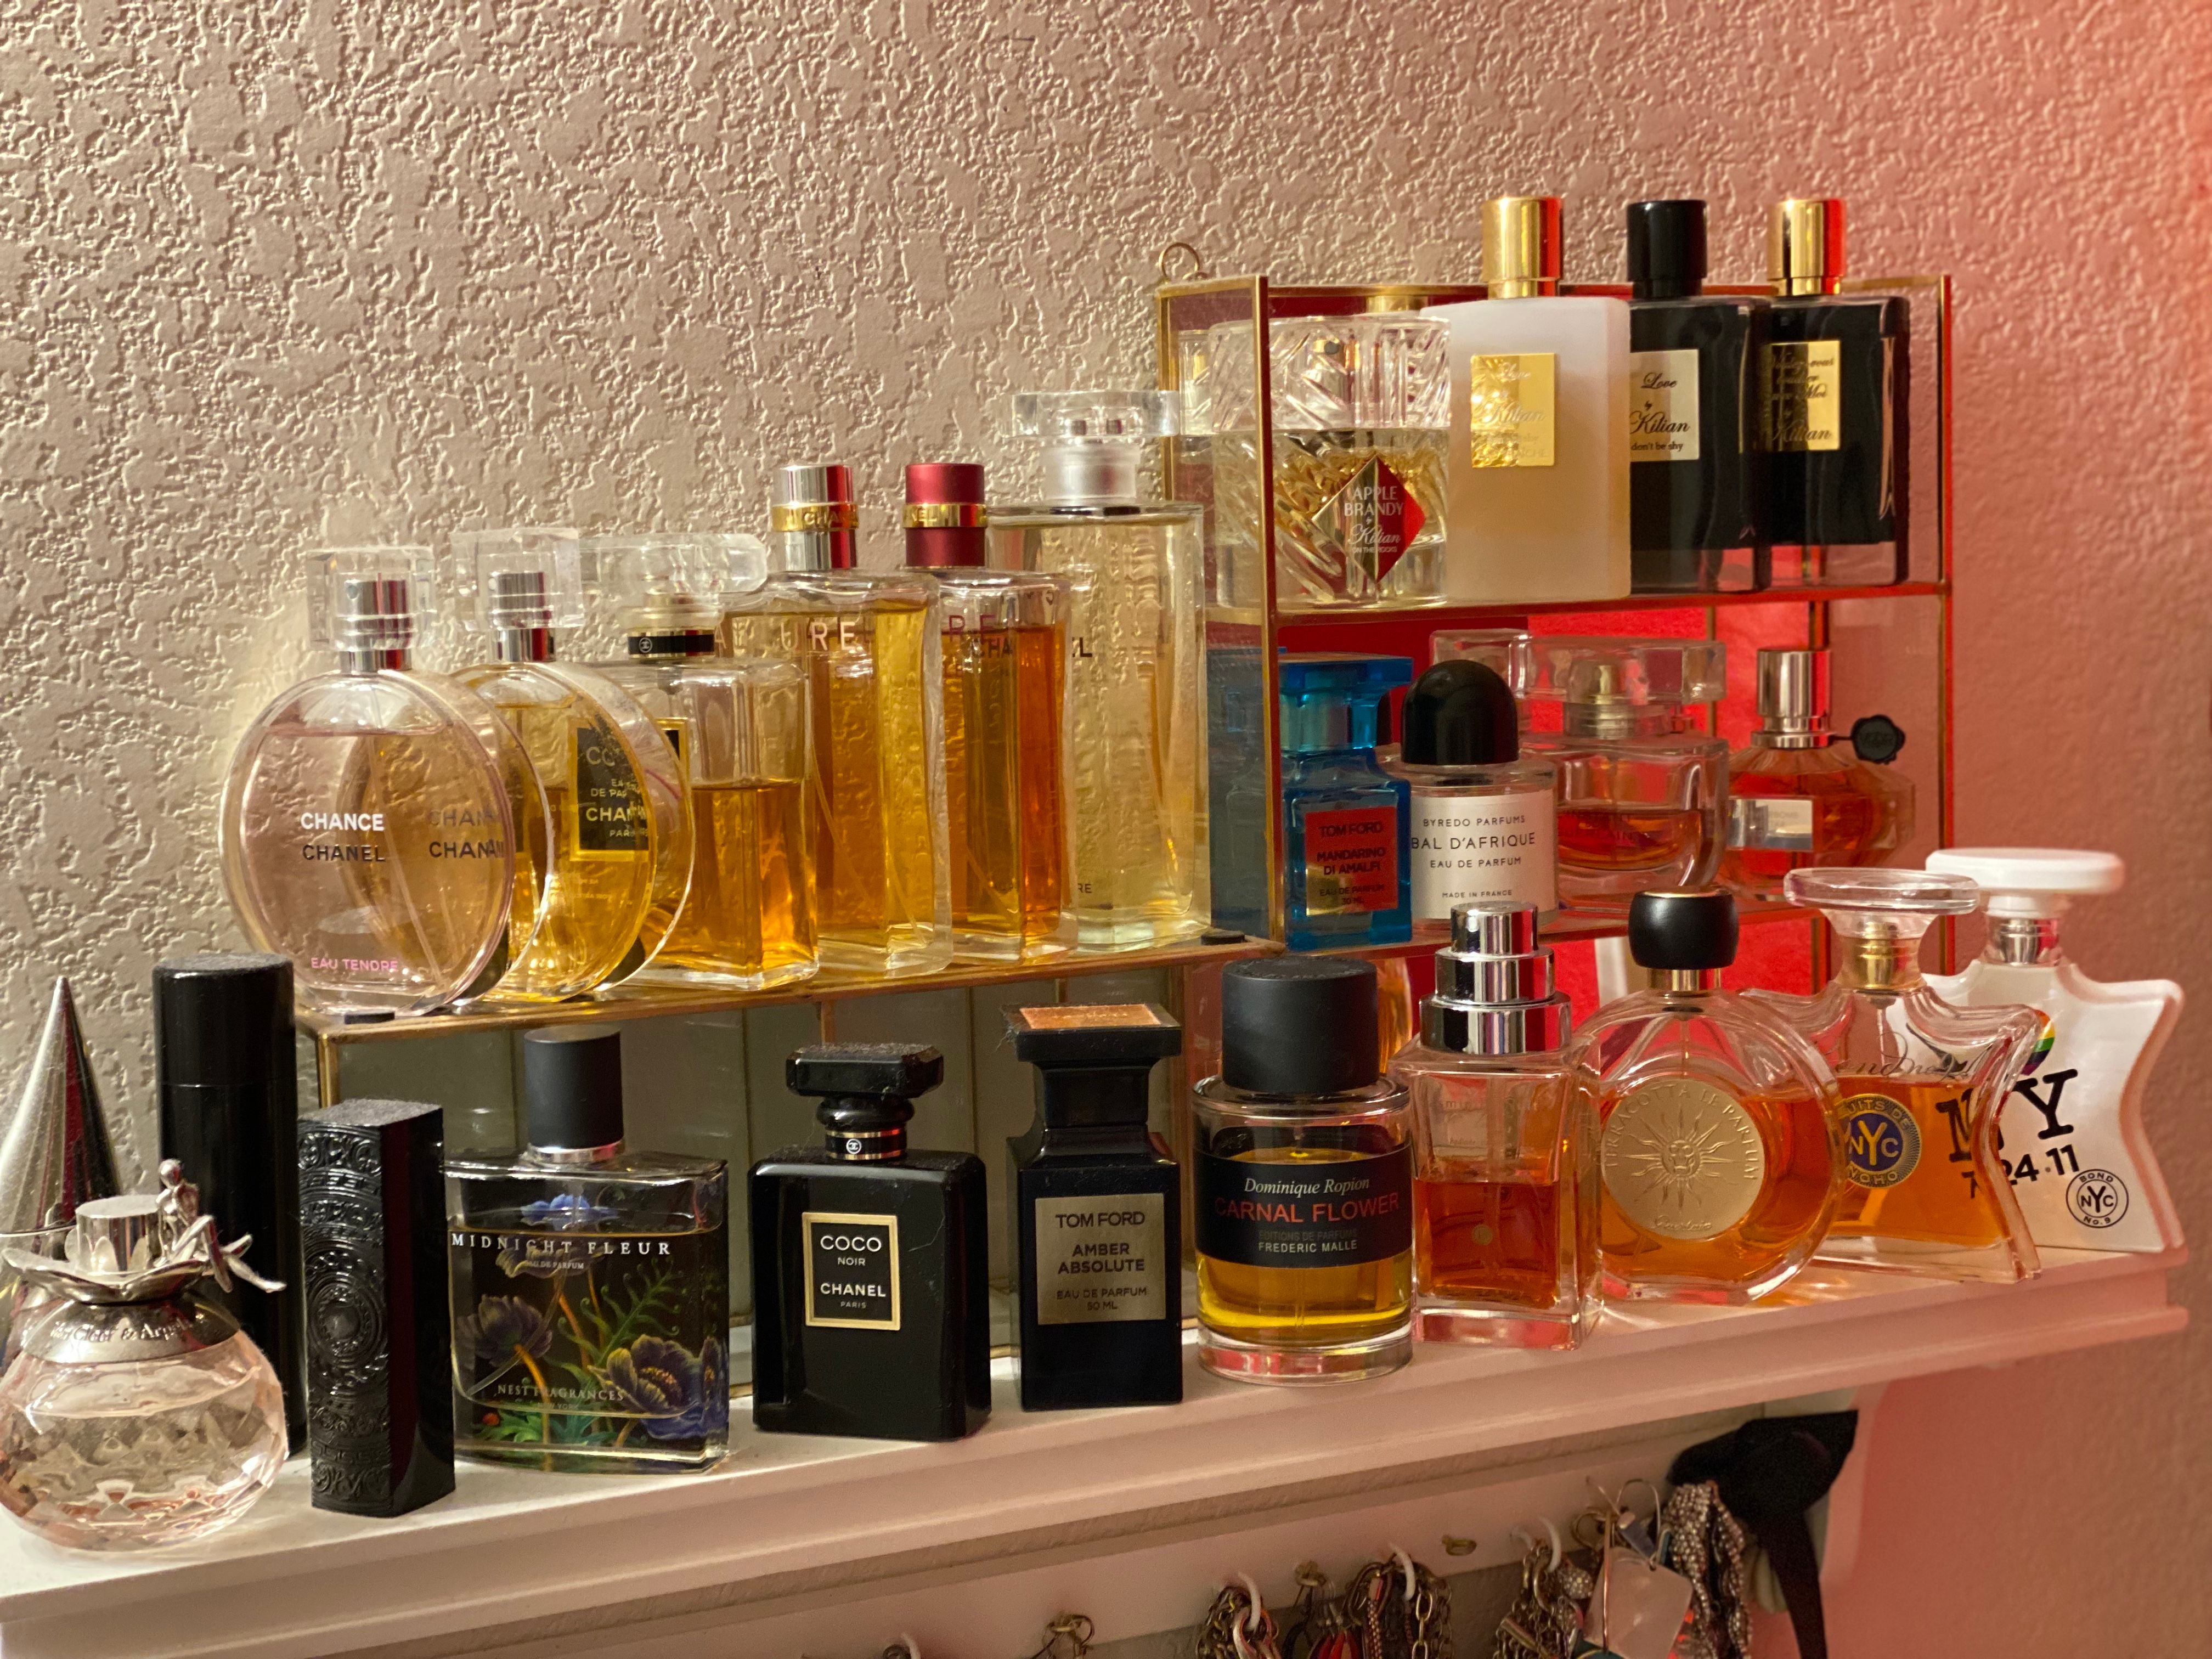 Re: - How To Display Perfume/Cologne Col - Beauty Insider Community